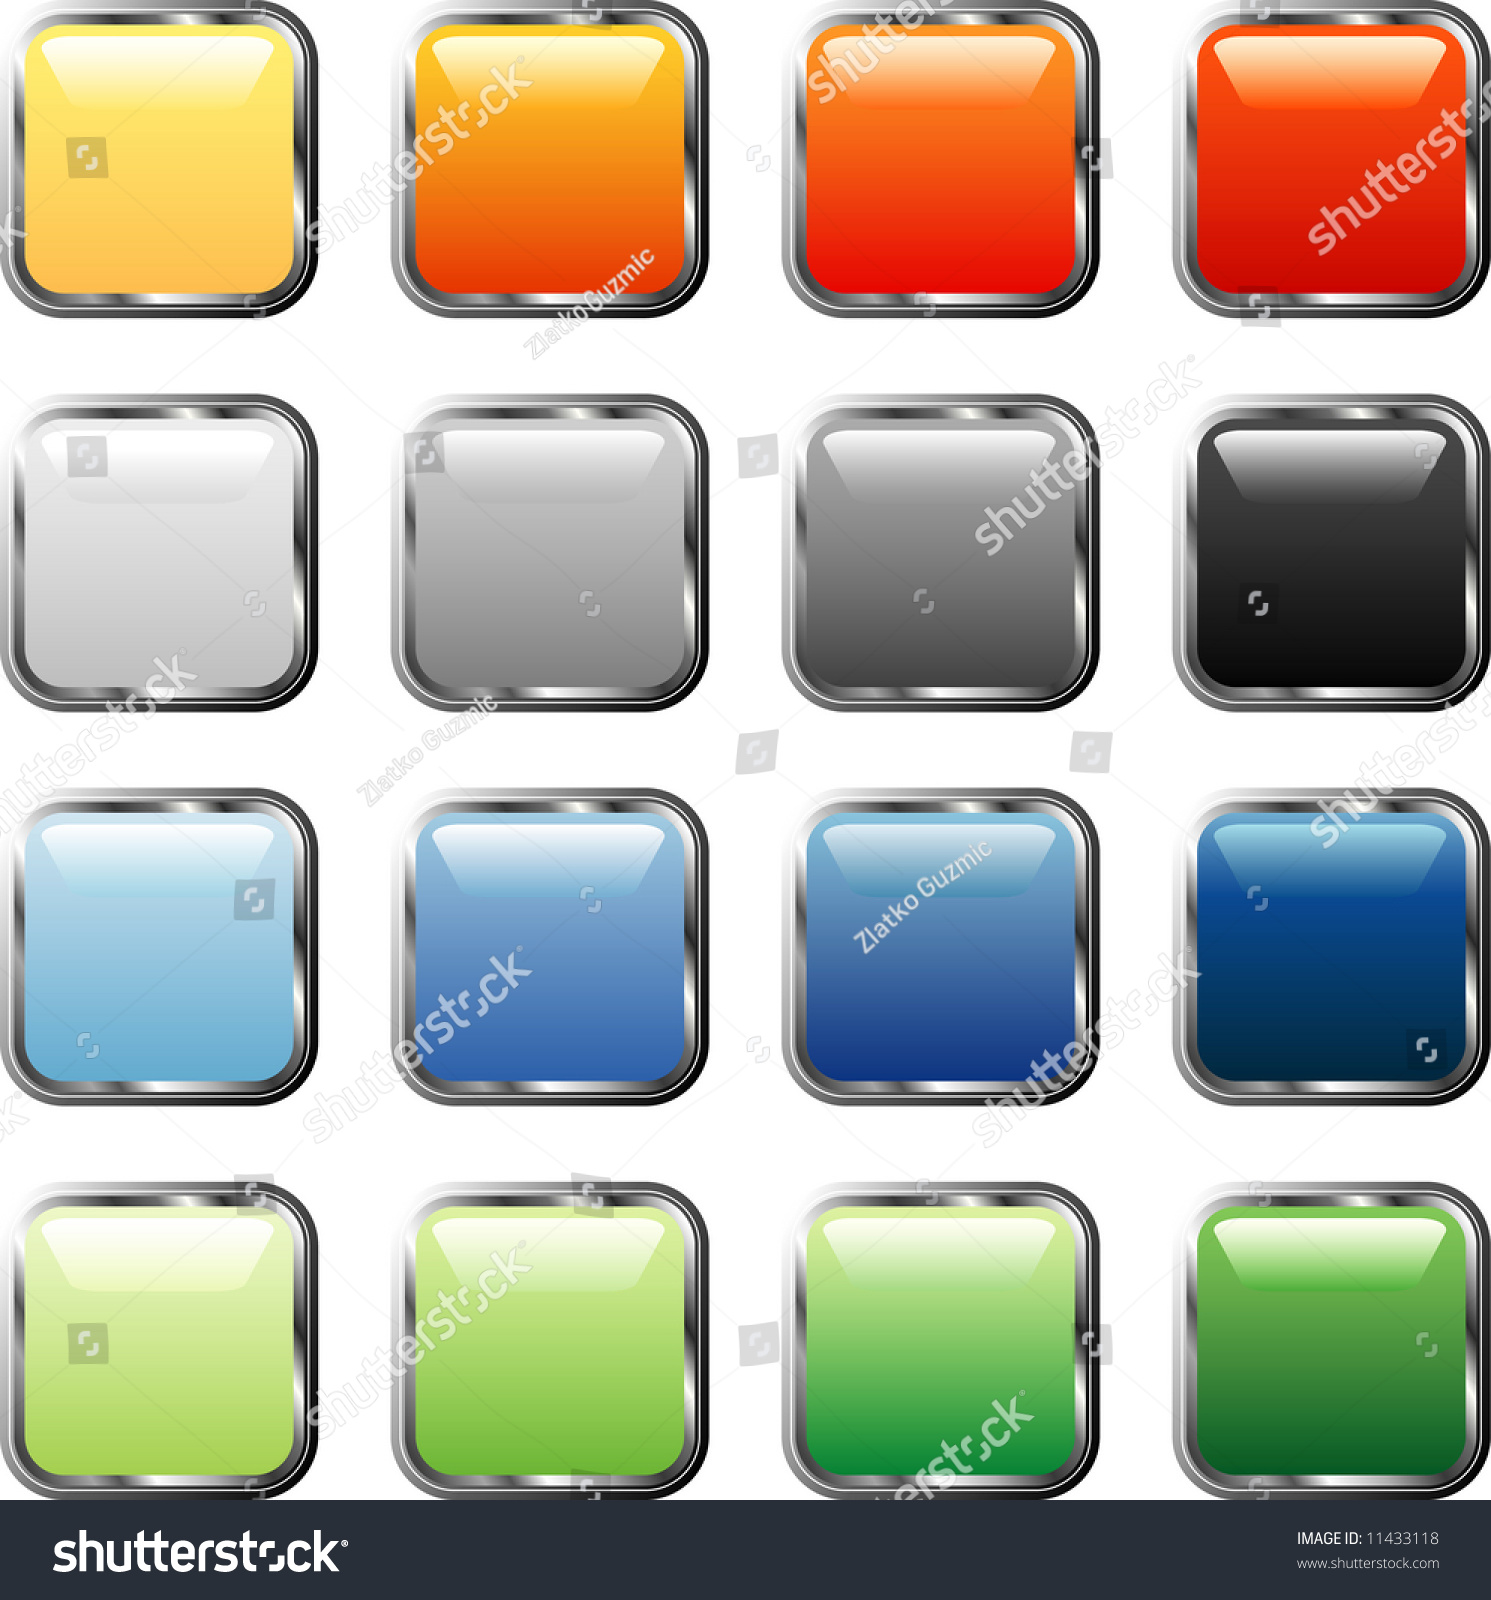 Vector Square Buttons With Silver Frame - 11433118 : Shutterstock